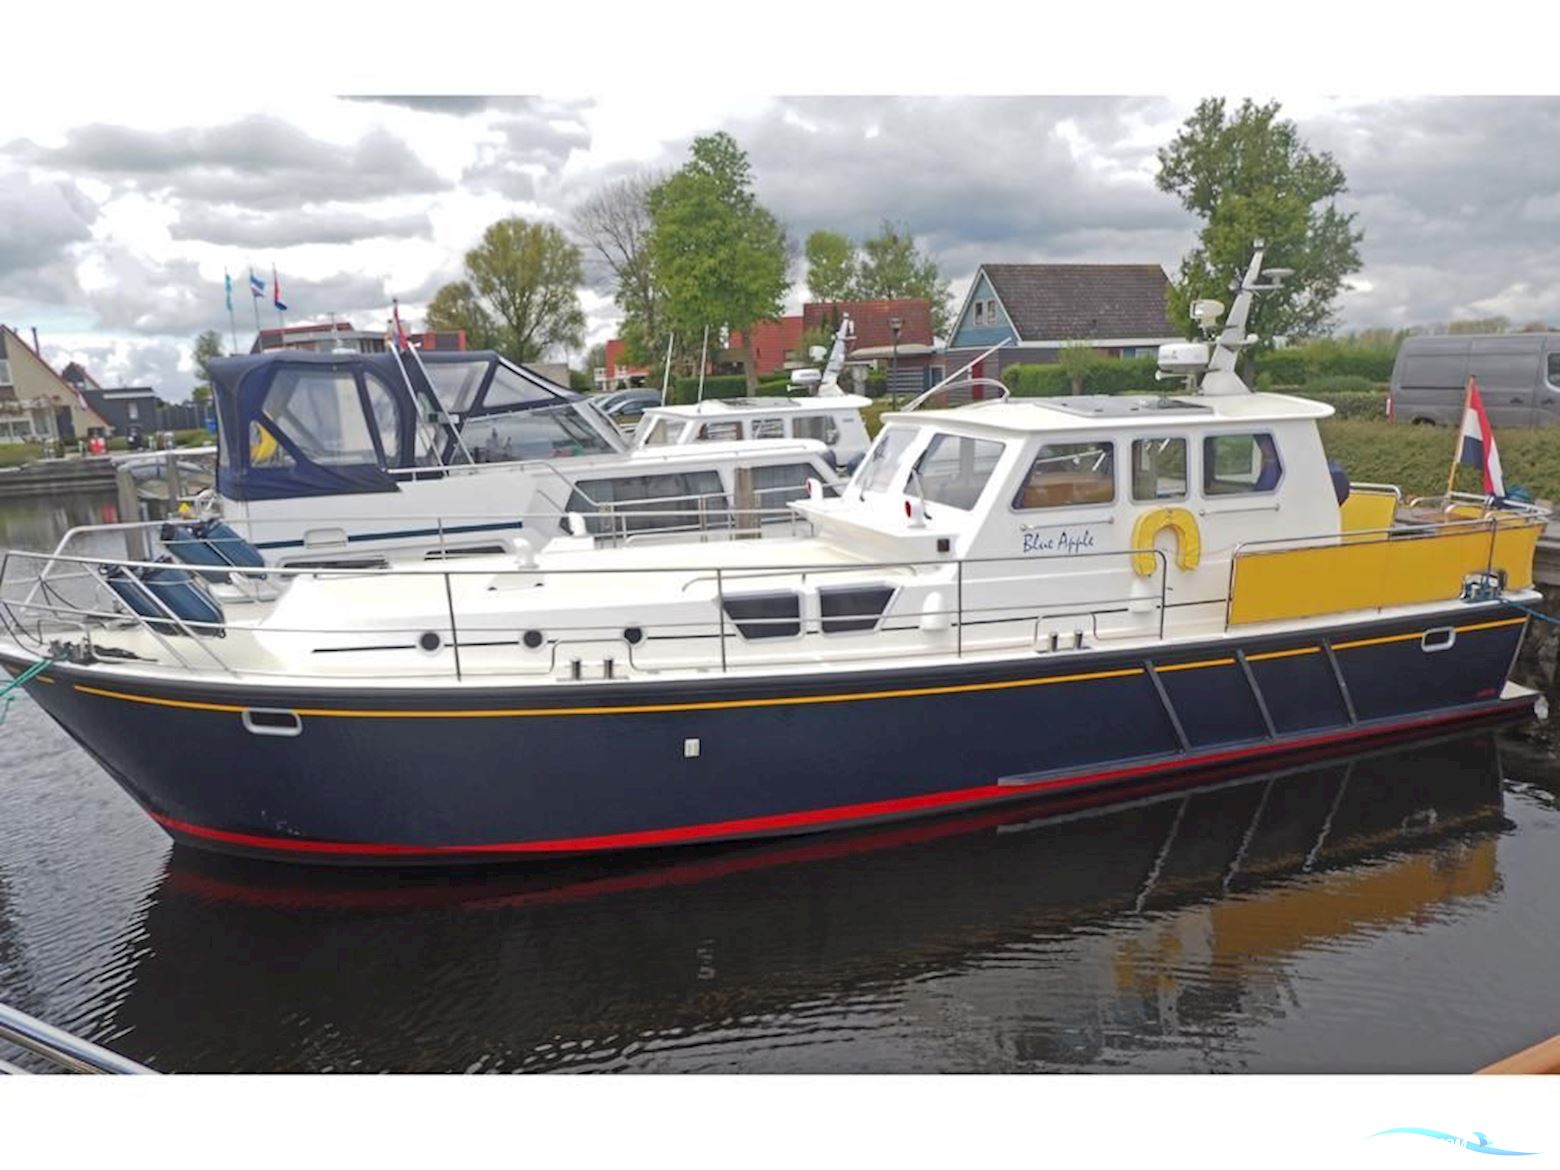 Pilot 44 Motor boat 1997, with Iveco Aifo engine, The Netherlands